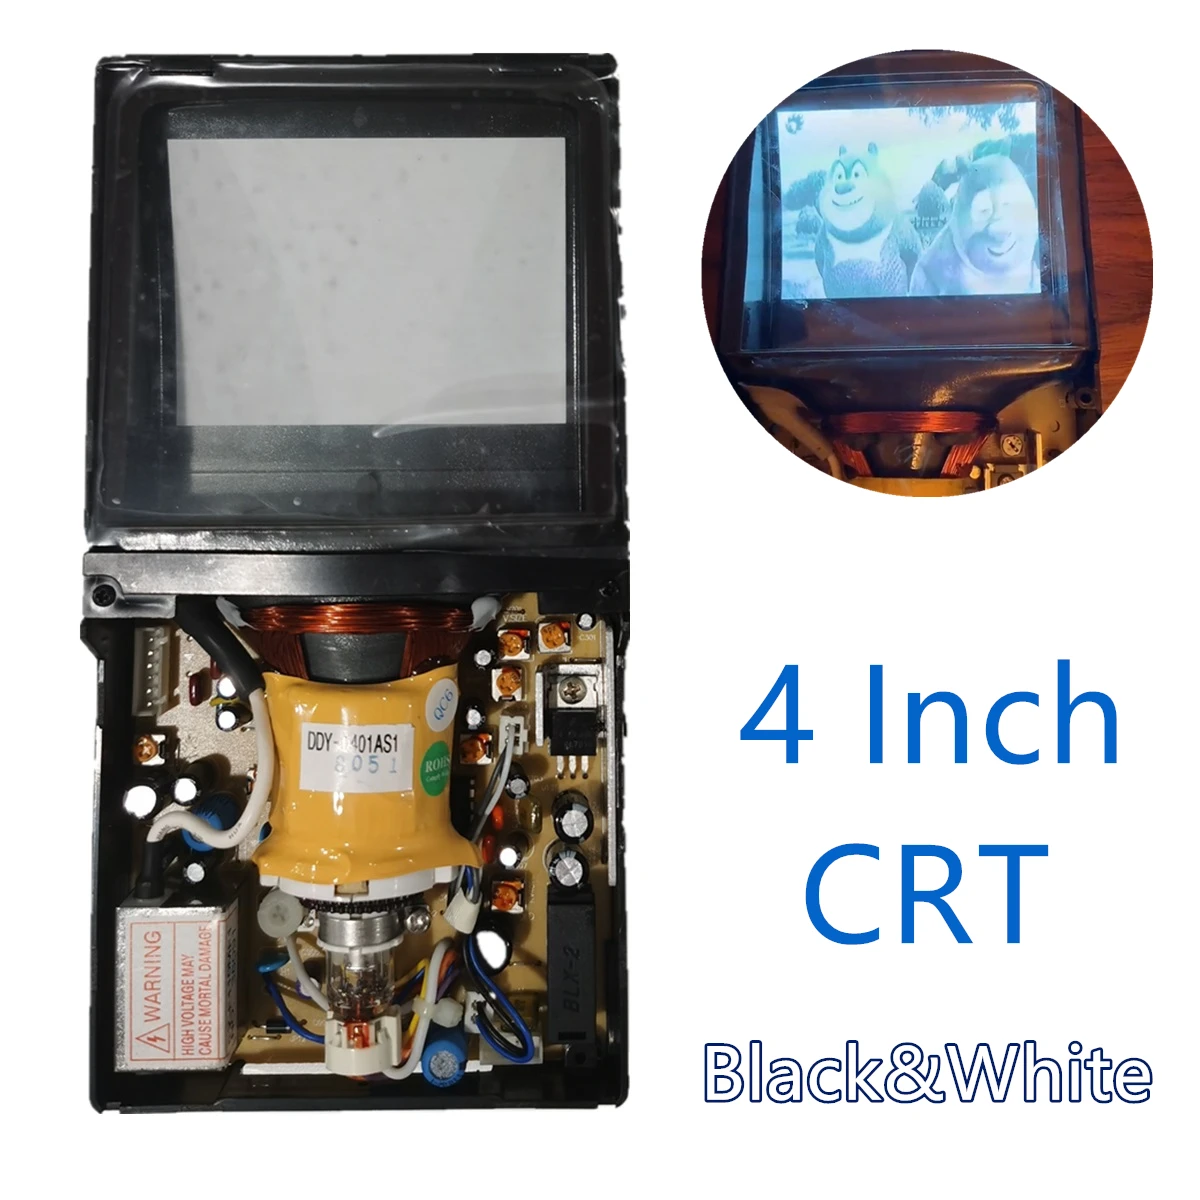 rijk roddel methaan Micro 4" Crt Black And White Monitor Vintage Crt Screen Electronic Picture  Tube 4.2w 12v - Tool Parts - AliExpress